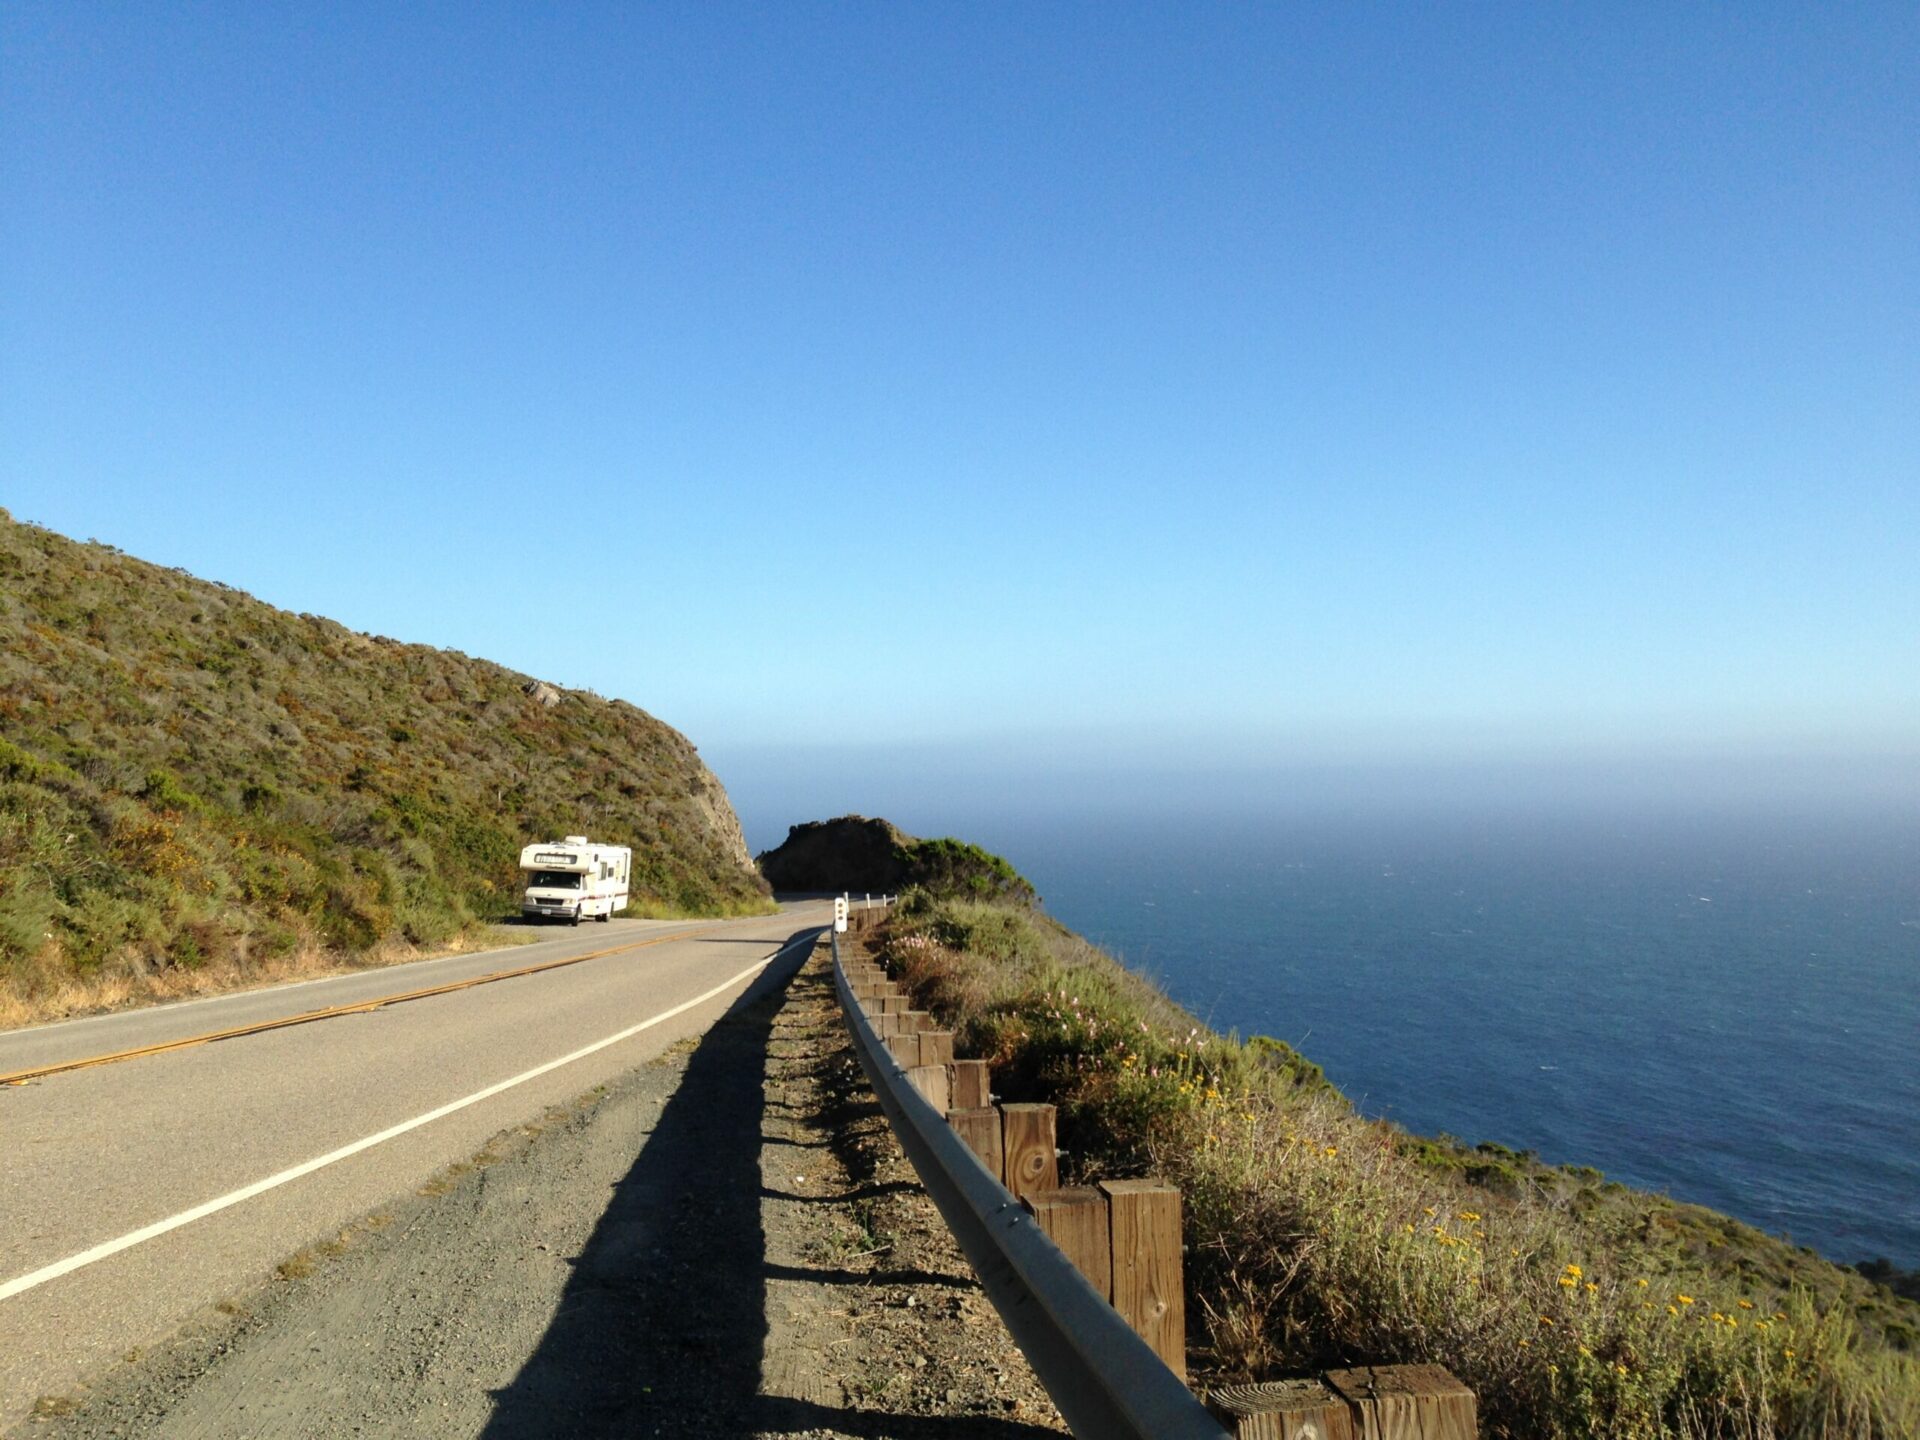 Photo of Franklin, Heath and Alyssa Padgett's first RV, on the side of the road along the Pacific Coast Highway.